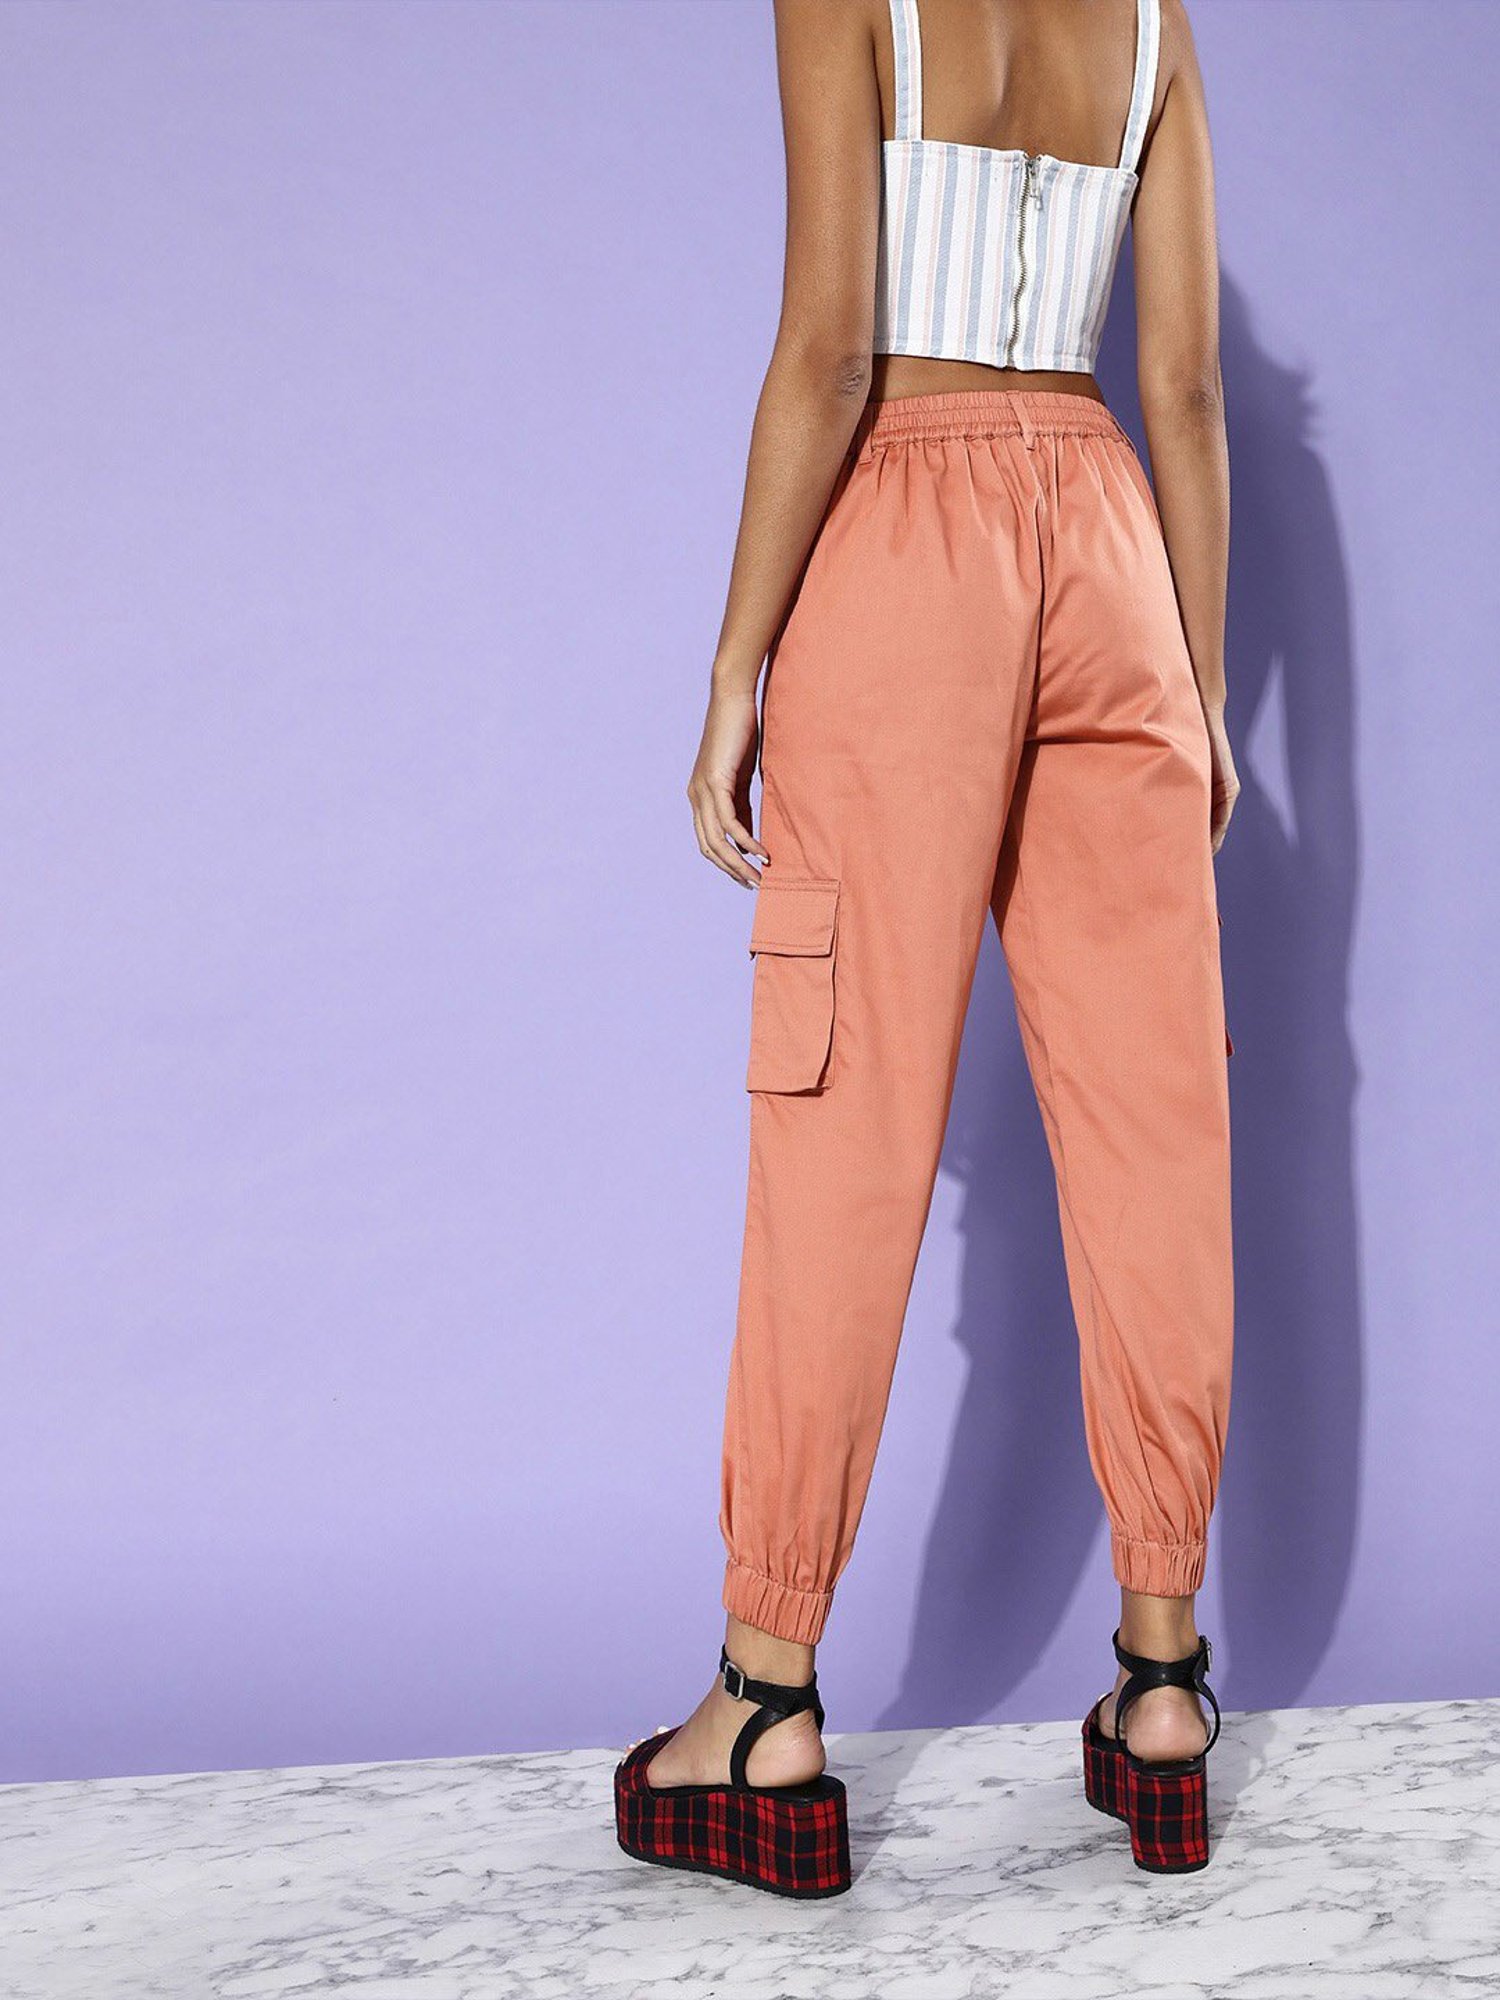 Shop Londyn Curb Chain Cargo Joggers for Women from latest collection at  Forever 21  503752